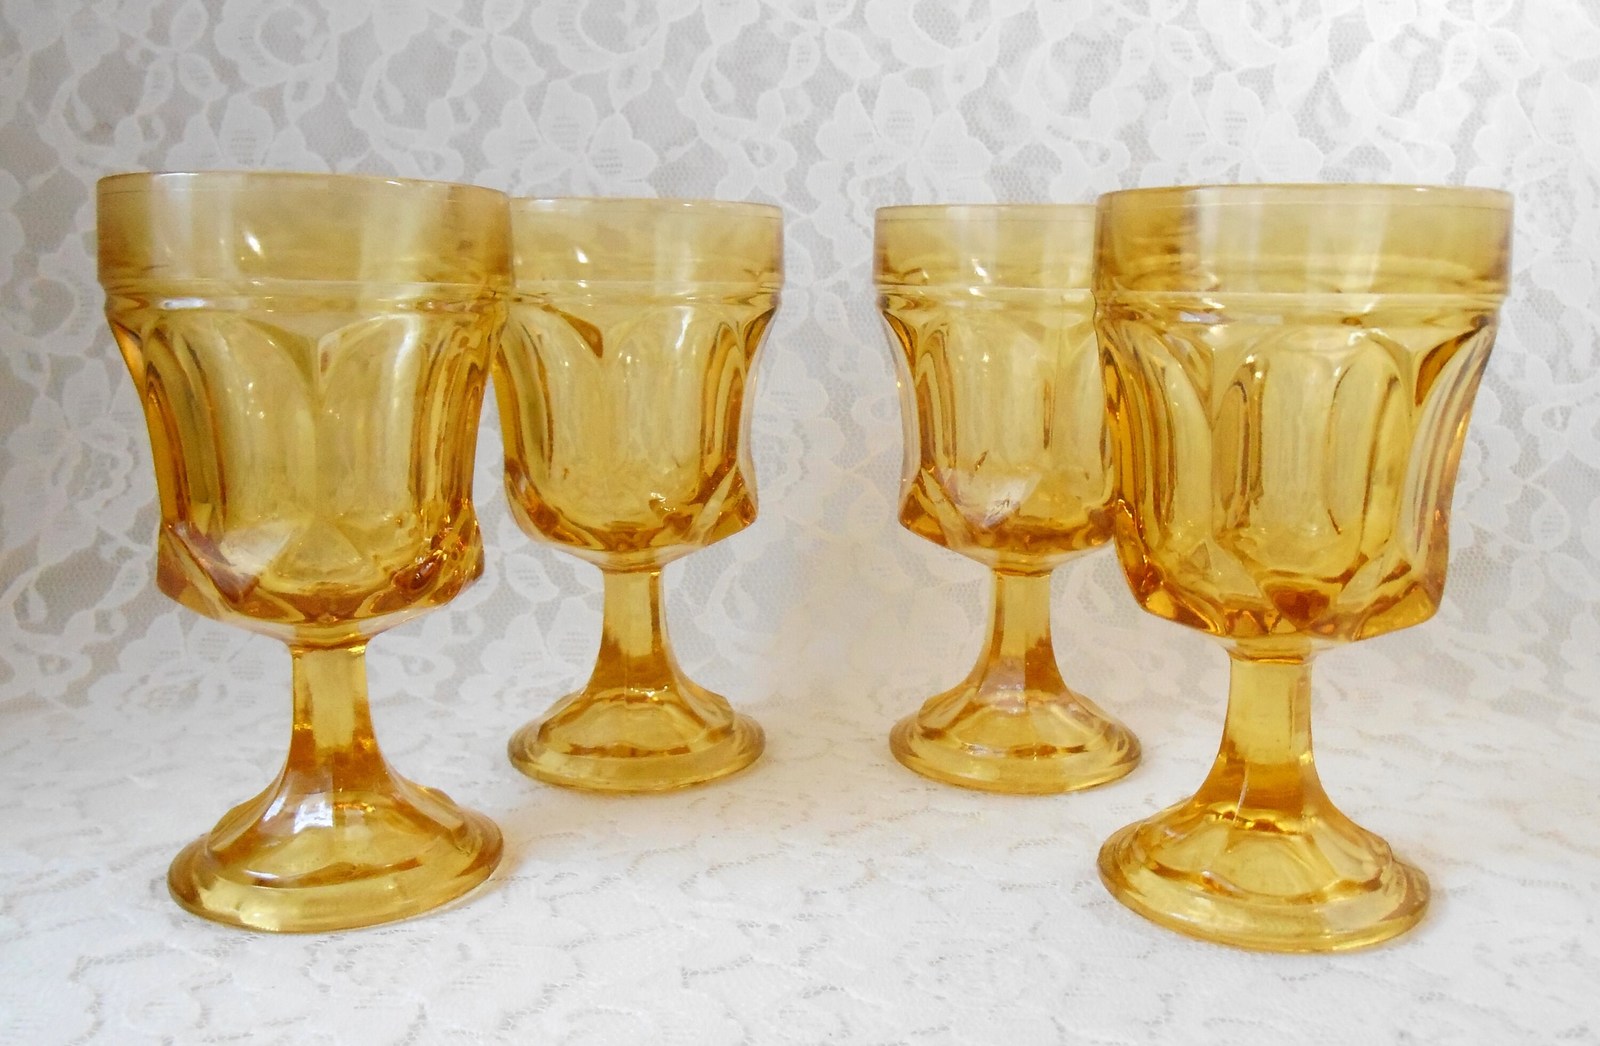 Vintage Anchor Hocking Glasses Wine Goblets in Fairfield Pattern 4 Ounce, Amber  - $24.00